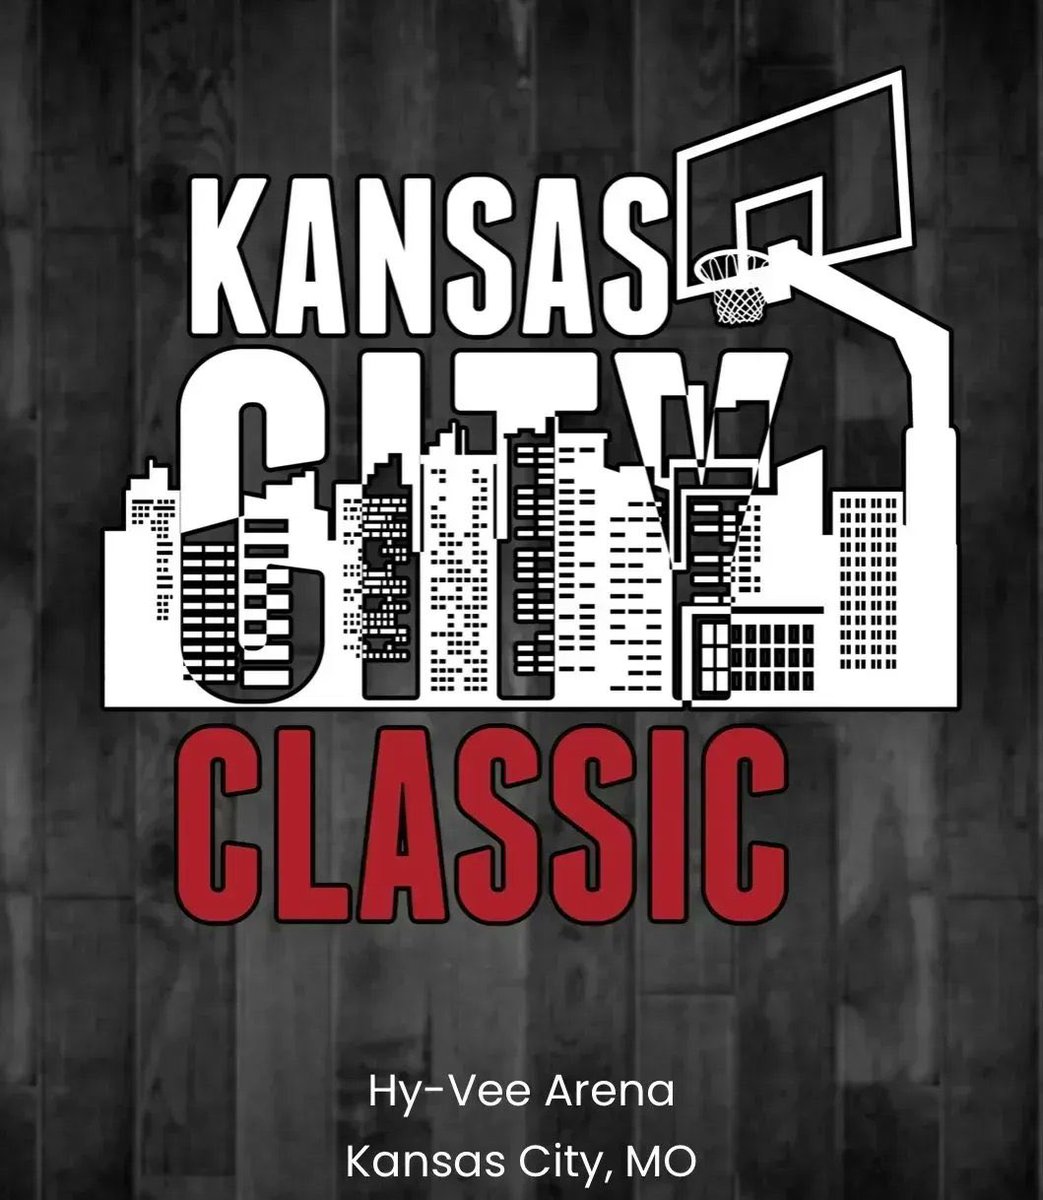 HS Coaches: Send us a DM if you come out this weekend and we’ll put you on the pass list down at #HyVeeArena. You are appreciated!